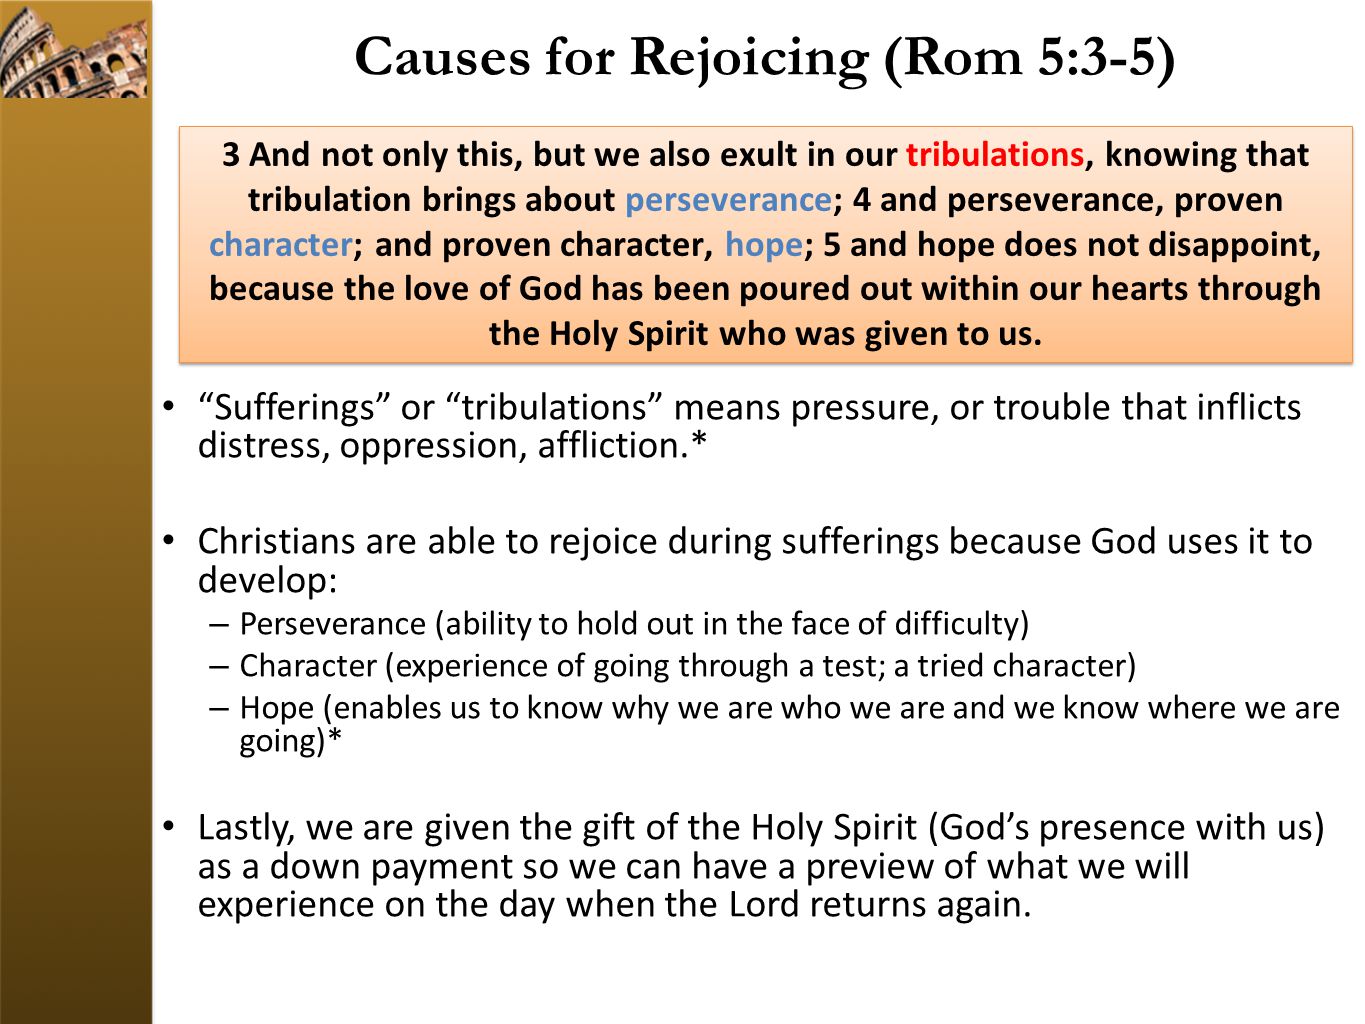 Causes for Rejoicing (Rom 5:3-5) Sufferings or tribulations means pressure, or trouble that inflicts distress, oppression, affliction.* Christians are able to rejoice during sufferings because God uses it to develop: – Perseverance (ability to hold out in the face of difficulty) – Character (experience of going through a test; a tried character) – Hope (enables us to know why we are who we are and we know where we are going)* Lastly, we are given the gift of the Holy Spirit (God’s presence with us) as a down payment so we can have a preview of what we will experience on the day when the Lord returns again.